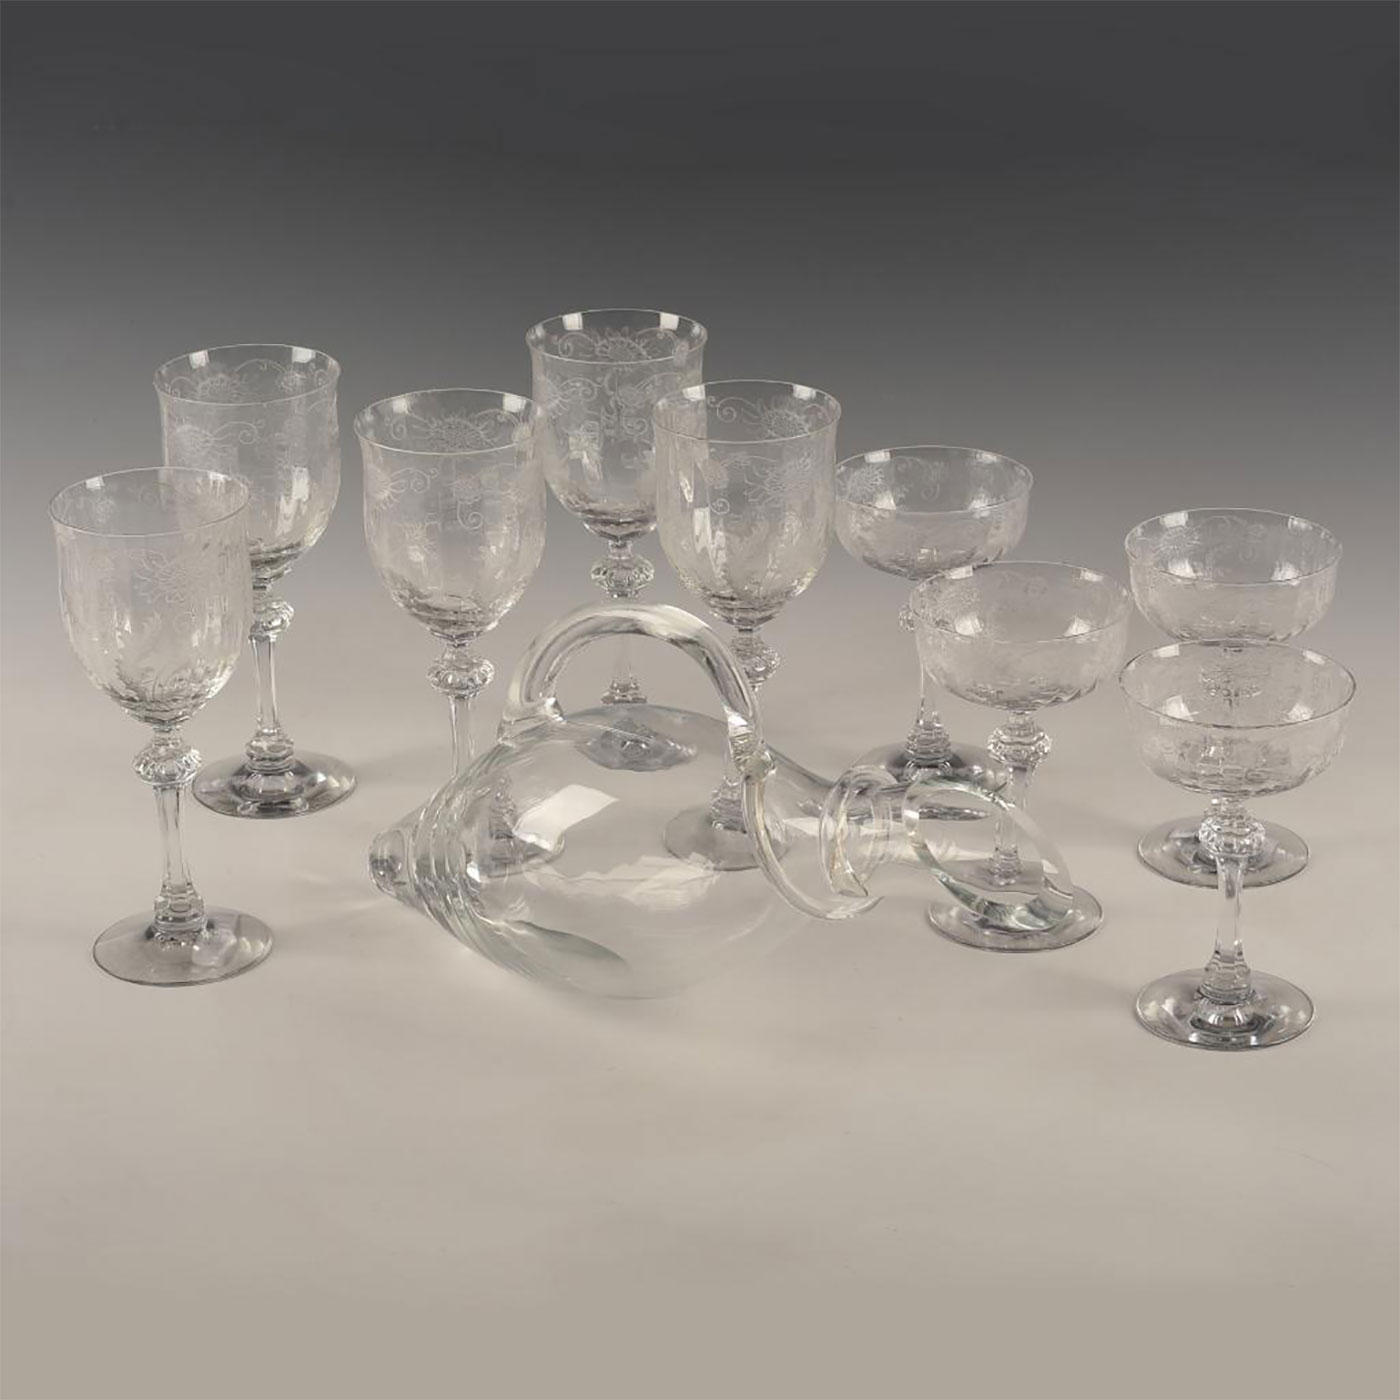 SET OF 5 WINE GLASSES, 4 GOBLETS, AND DUCK AERATOR - Image 2 of 9